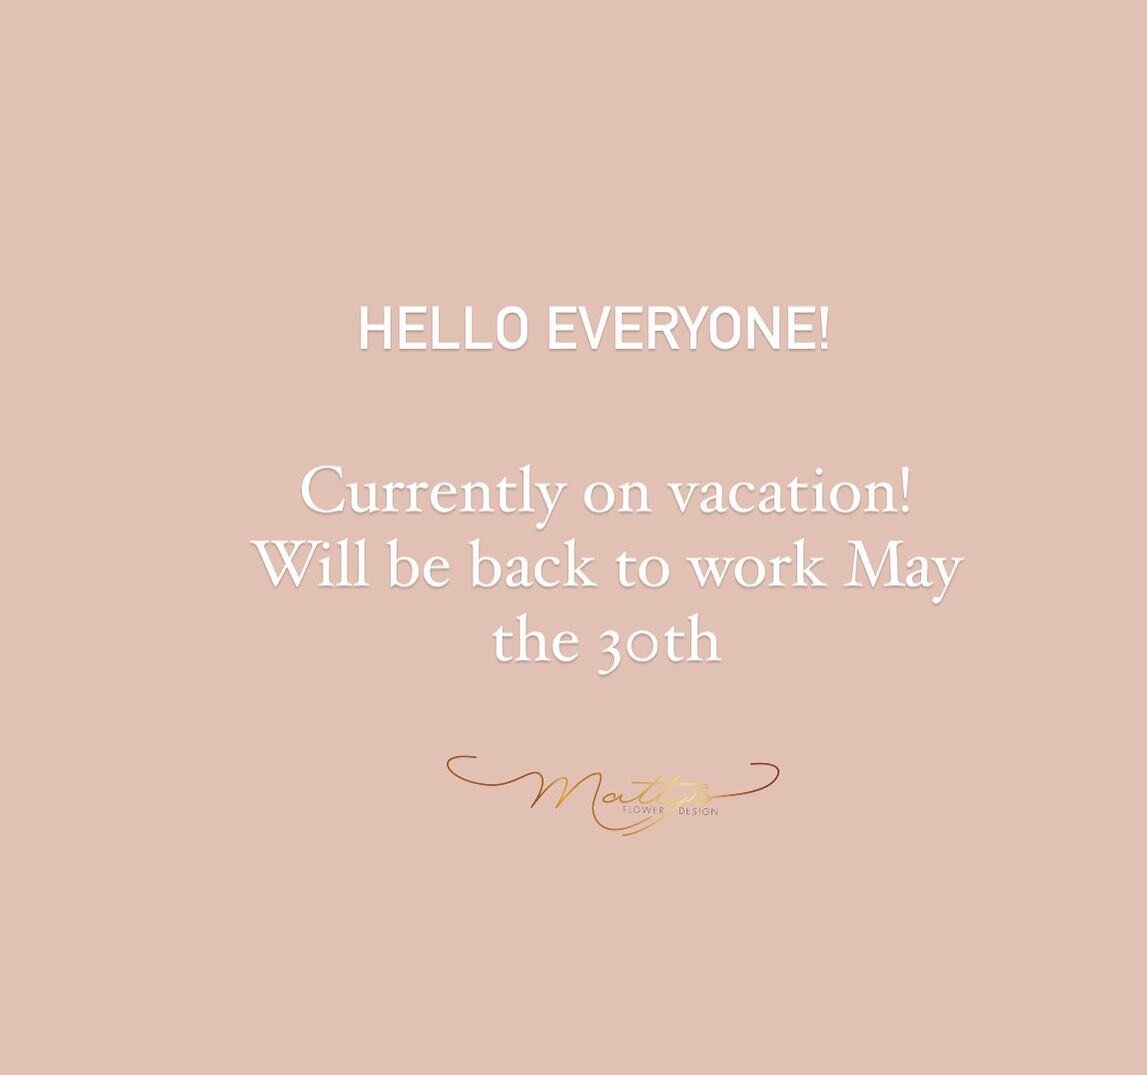 Hi guys! Thank you so so much for the continuing business. I am officially on vacation and will be back to work May the 30th! See you then! #mattysdesign